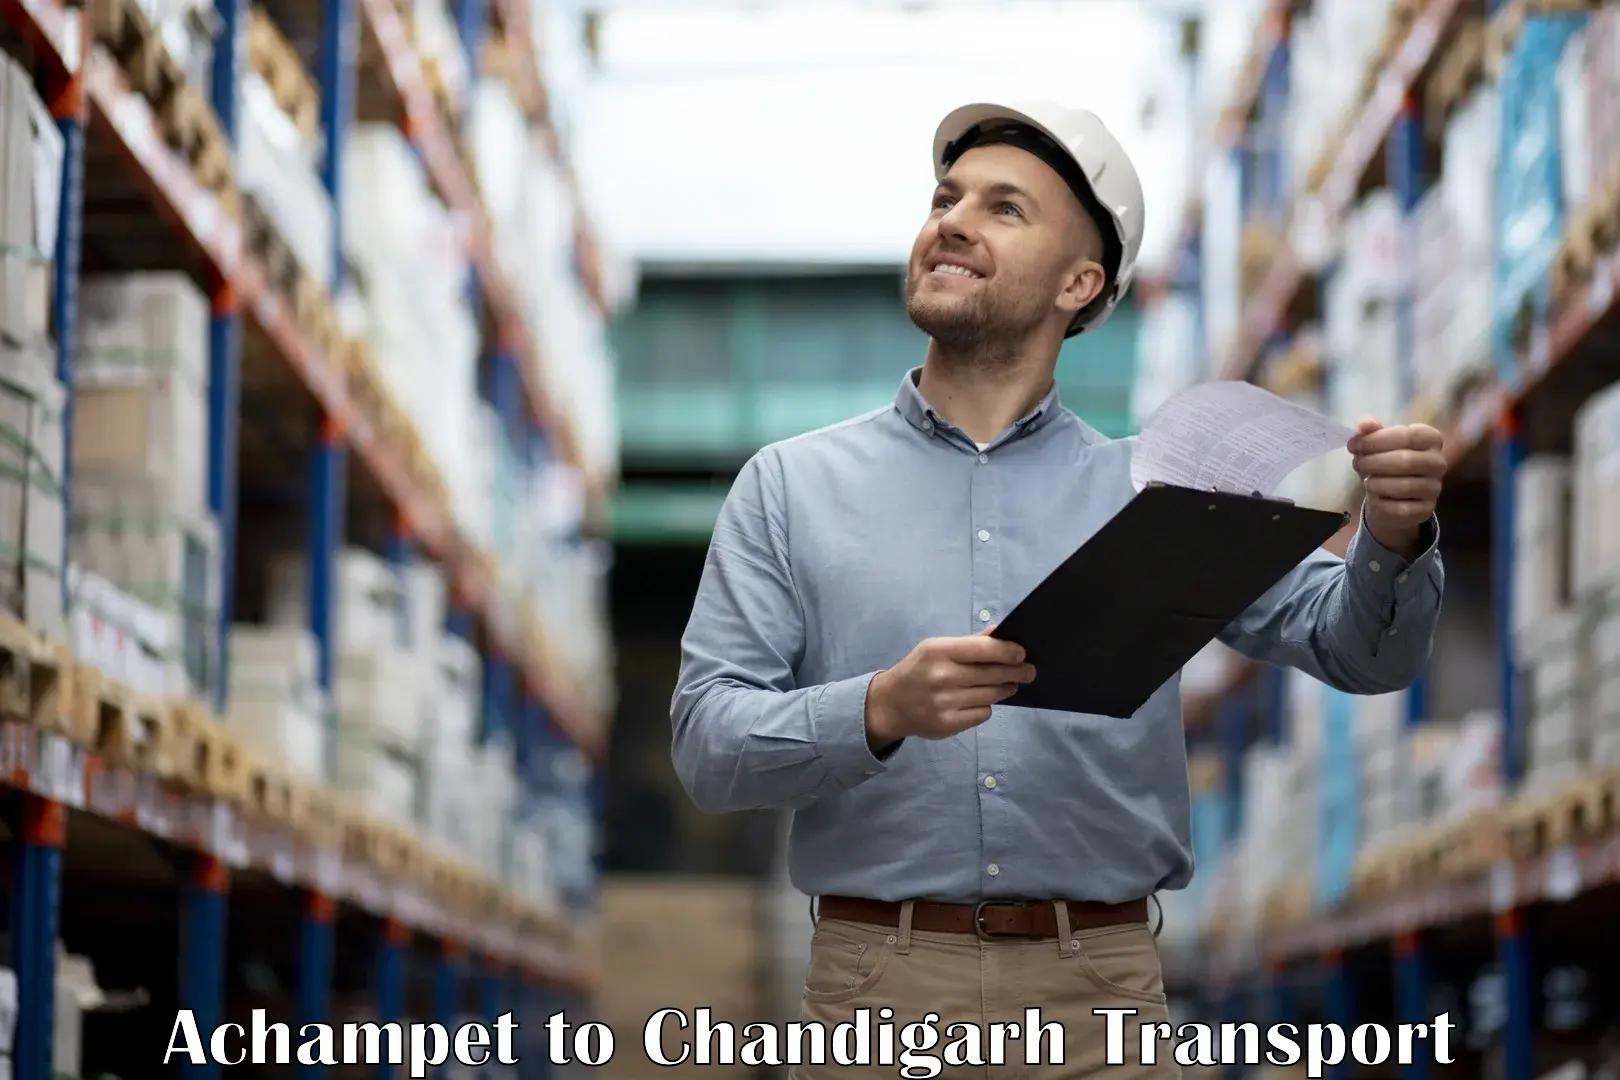 Cycle transportation service Achampet to Chandigarh